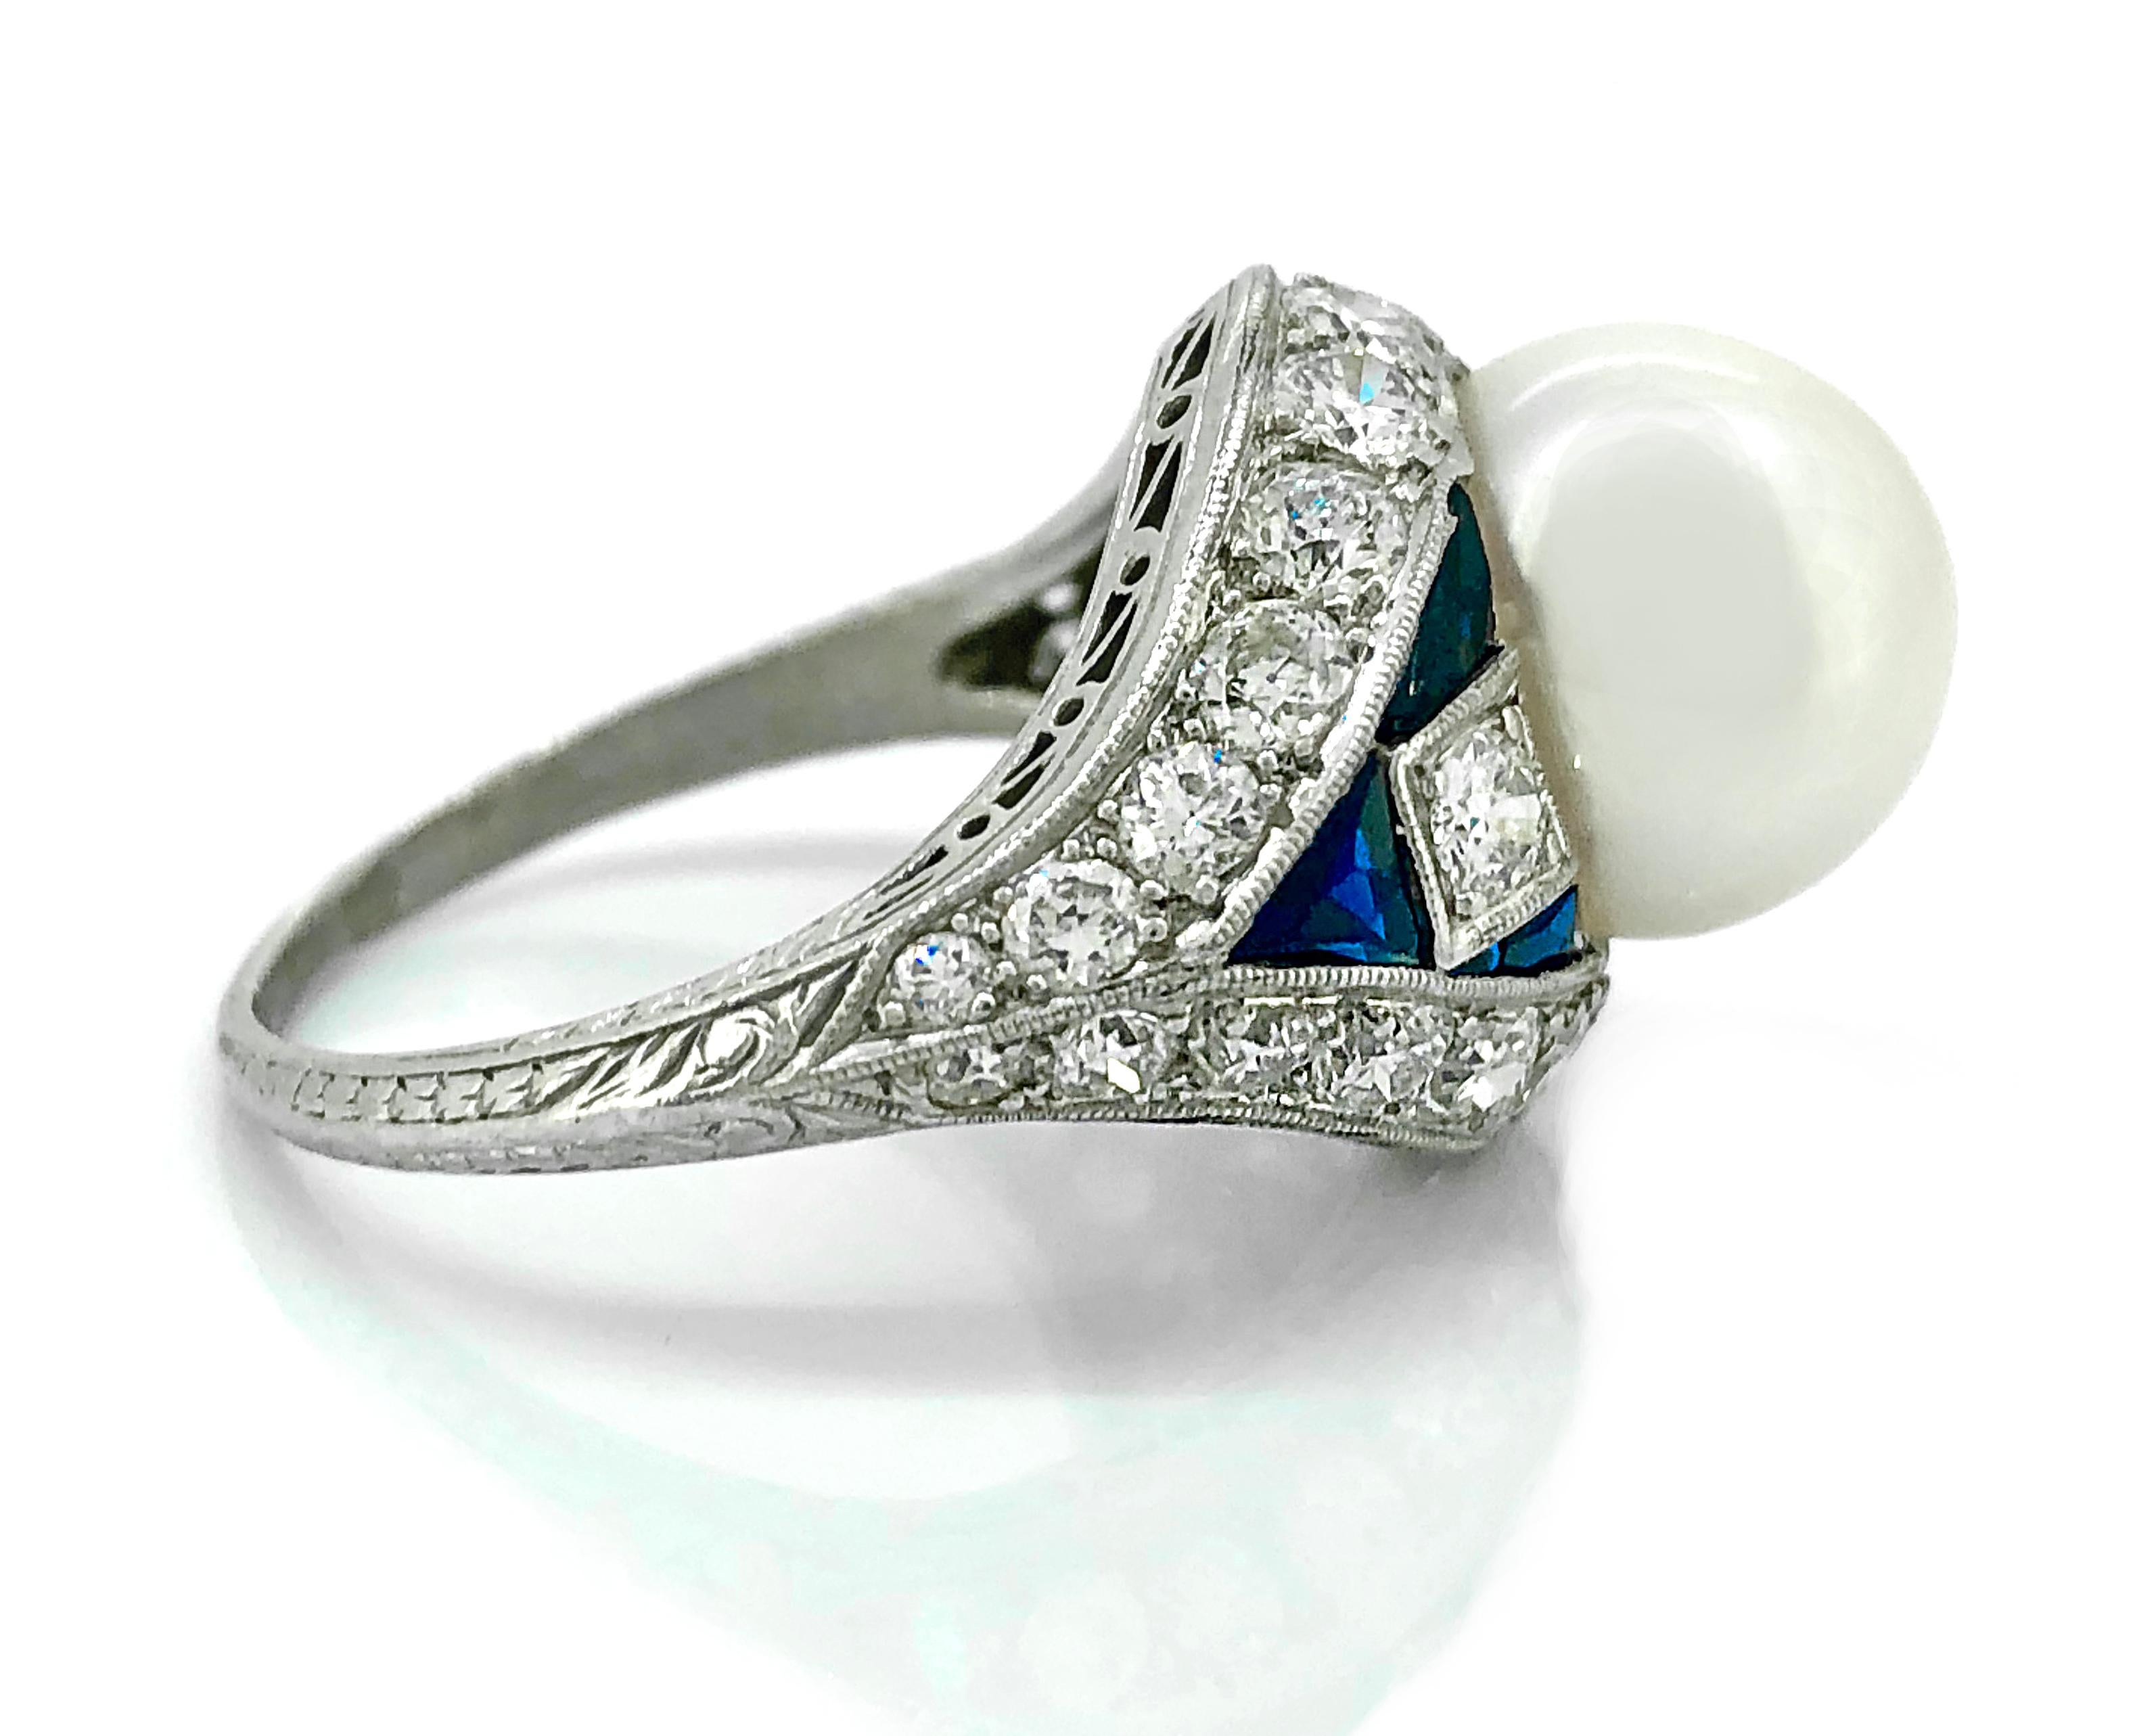 An extraordinary alluring Art Deco pearl, diamond and sapphire Antique engagement or fashion ring featuring a 10.1mm Akoya pearl, 2.25ct. Apx. T.W. of European cut diamonds with VS2-SI1 clarity and G-H color, as well as .75ct. Apx. T.W. of synthetic